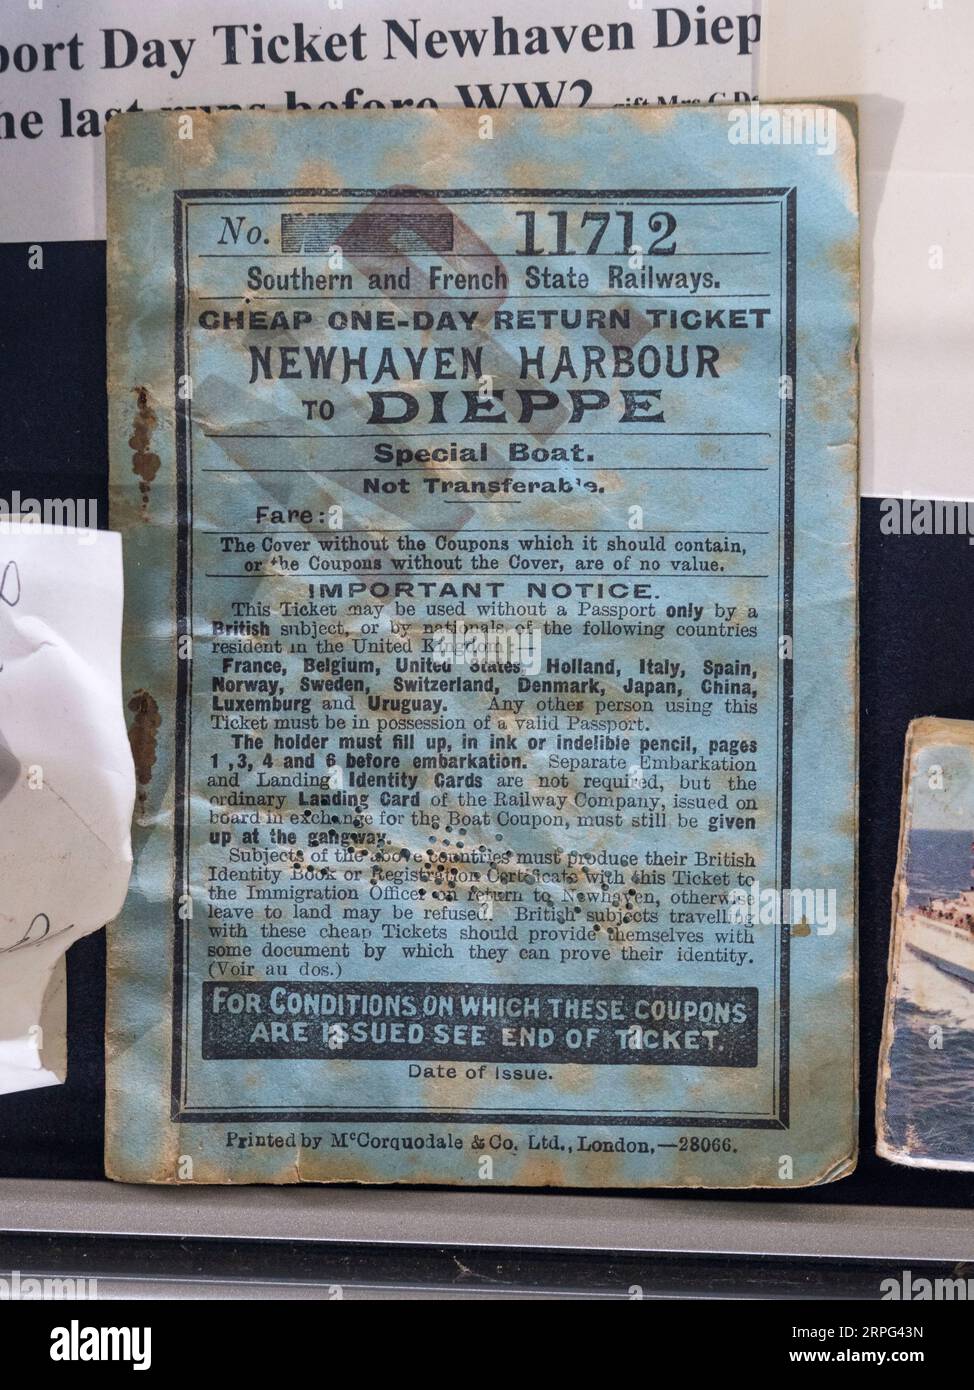 Pre-WWII Newhaven to Dieppe cheap one day return ticket on display in the Newhaven Museum, Newhaven, East Sussex, UK. Stock Photo